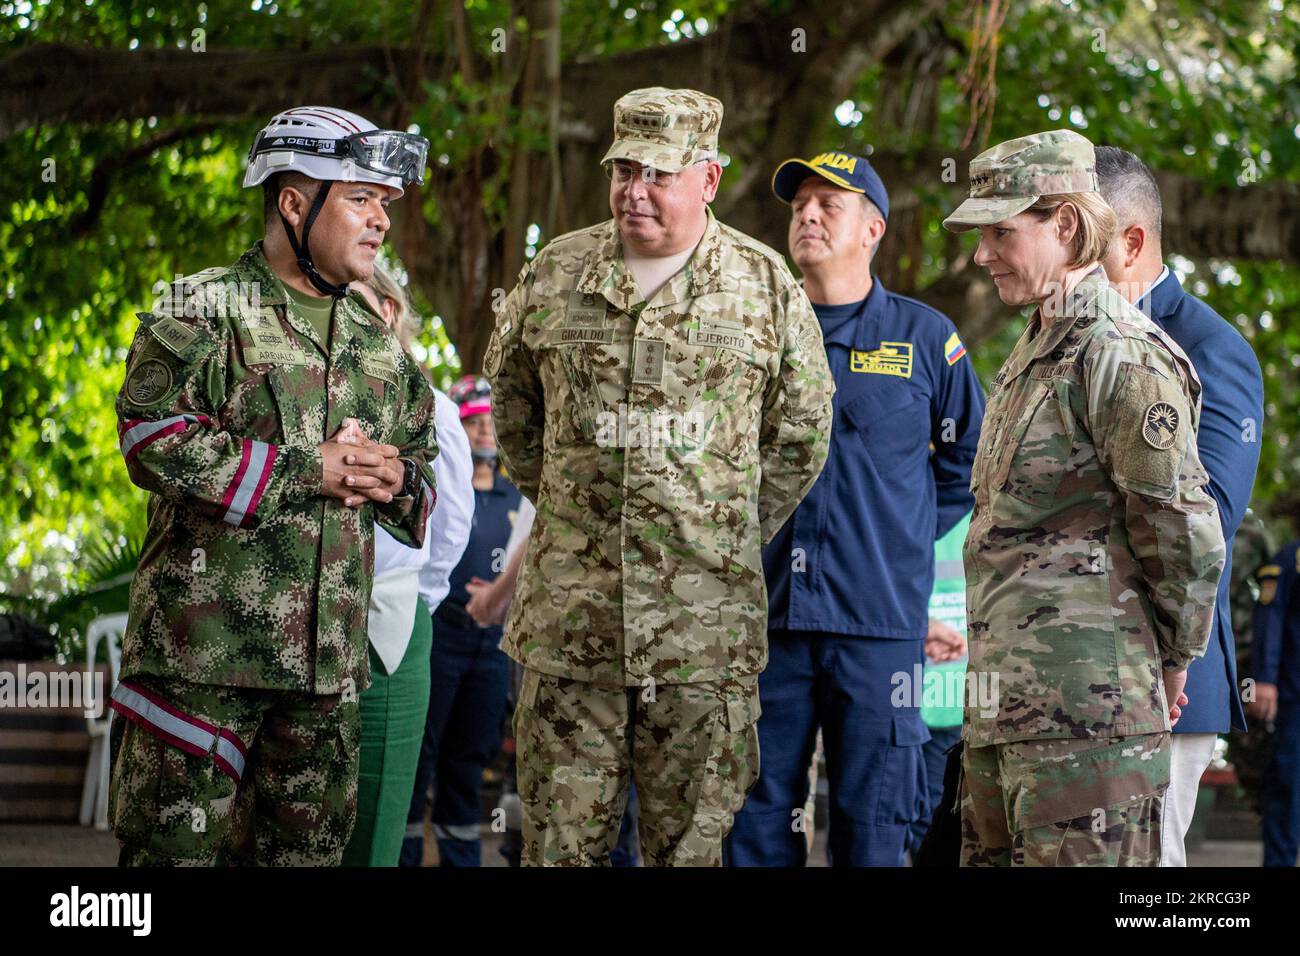 CARTAGENA, Colombia (Nov. 13, 2022)--U.S. Army Gen. Laura Richardson, commander of U.S. Southern Command, right, and Colombian army Maj. Gen. Helder Fernan Giraldo Bonilla, commander of Colombian Military Forces, receive a brief at a Continuing Promise 2022 (CP22) Humanitarian Assistance and Disaster Relief exercise in Cartagena, Colombia, Nov. 13, 2022. CP22 is a humanitarian assistance and goodwill mission conducting direct medical care, expeditionary veterinary care, and subject matter expert exchanges with five partner nations in the Caribbean, Central and South America. Stock Photo